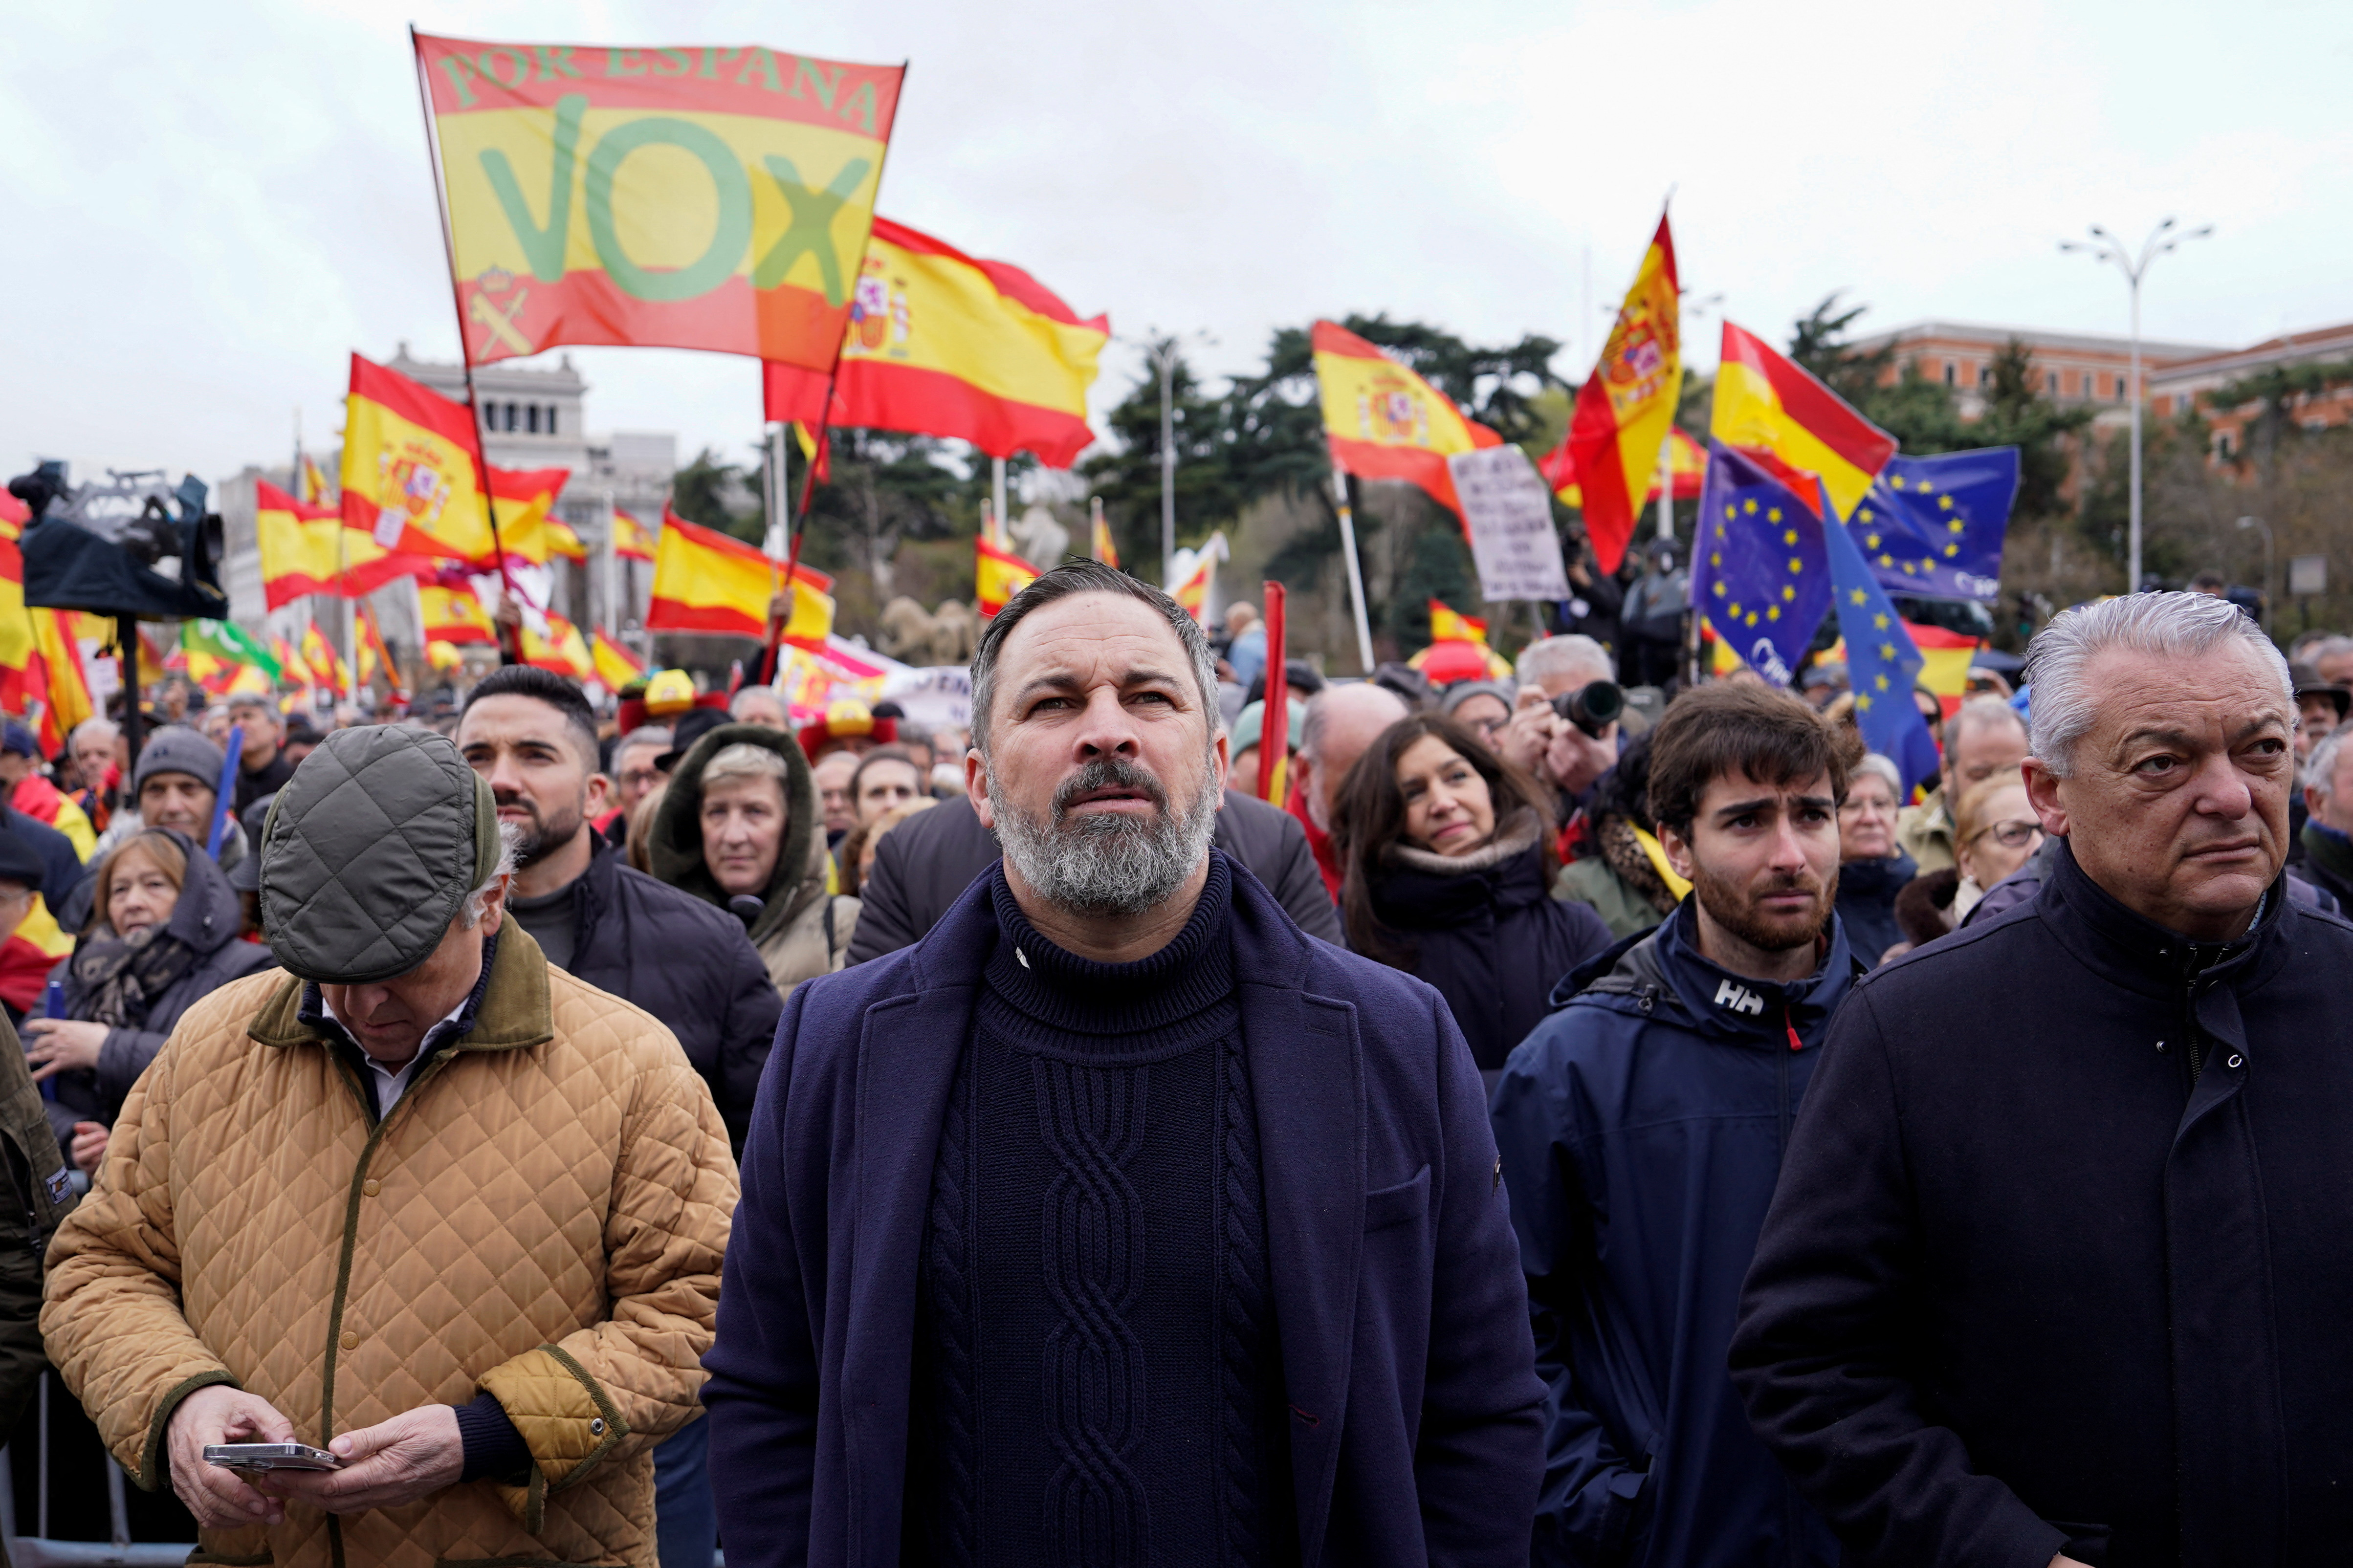 Spain's Vox party leader Abascal attends protest against PM Sanchez in Madrid